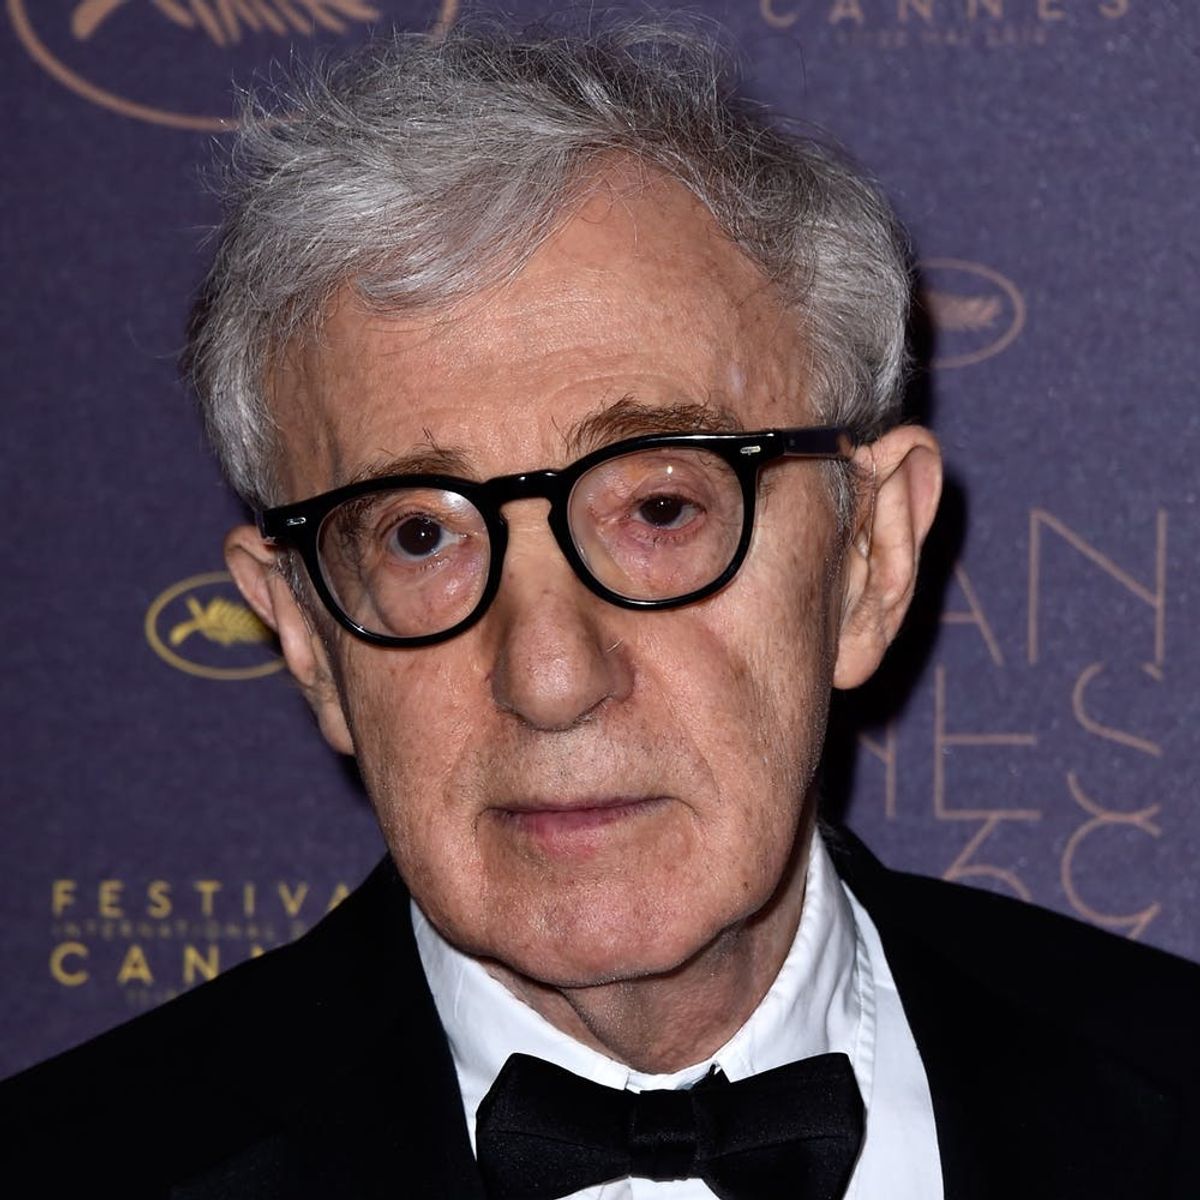 Spanish Women’s Group Petitions to Remove Woody Allen Statue